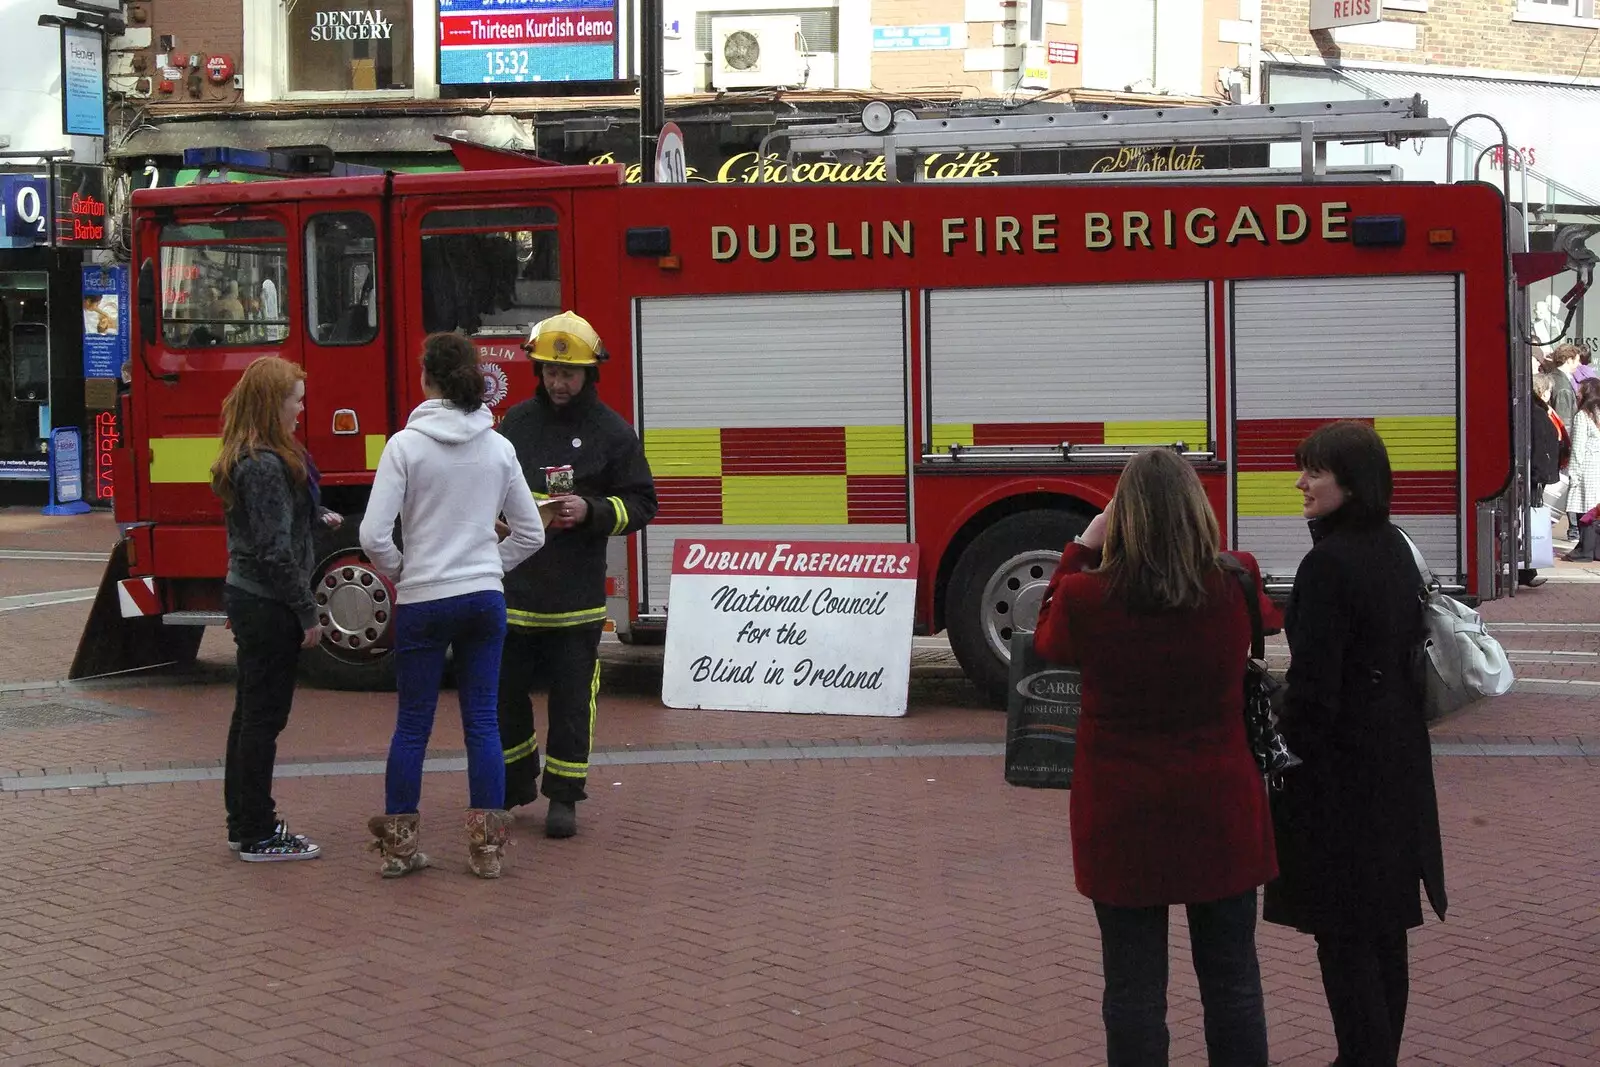 The Dublin Fire Brigade engine, from Easter in Dublin, Ireland - 21st March 2008